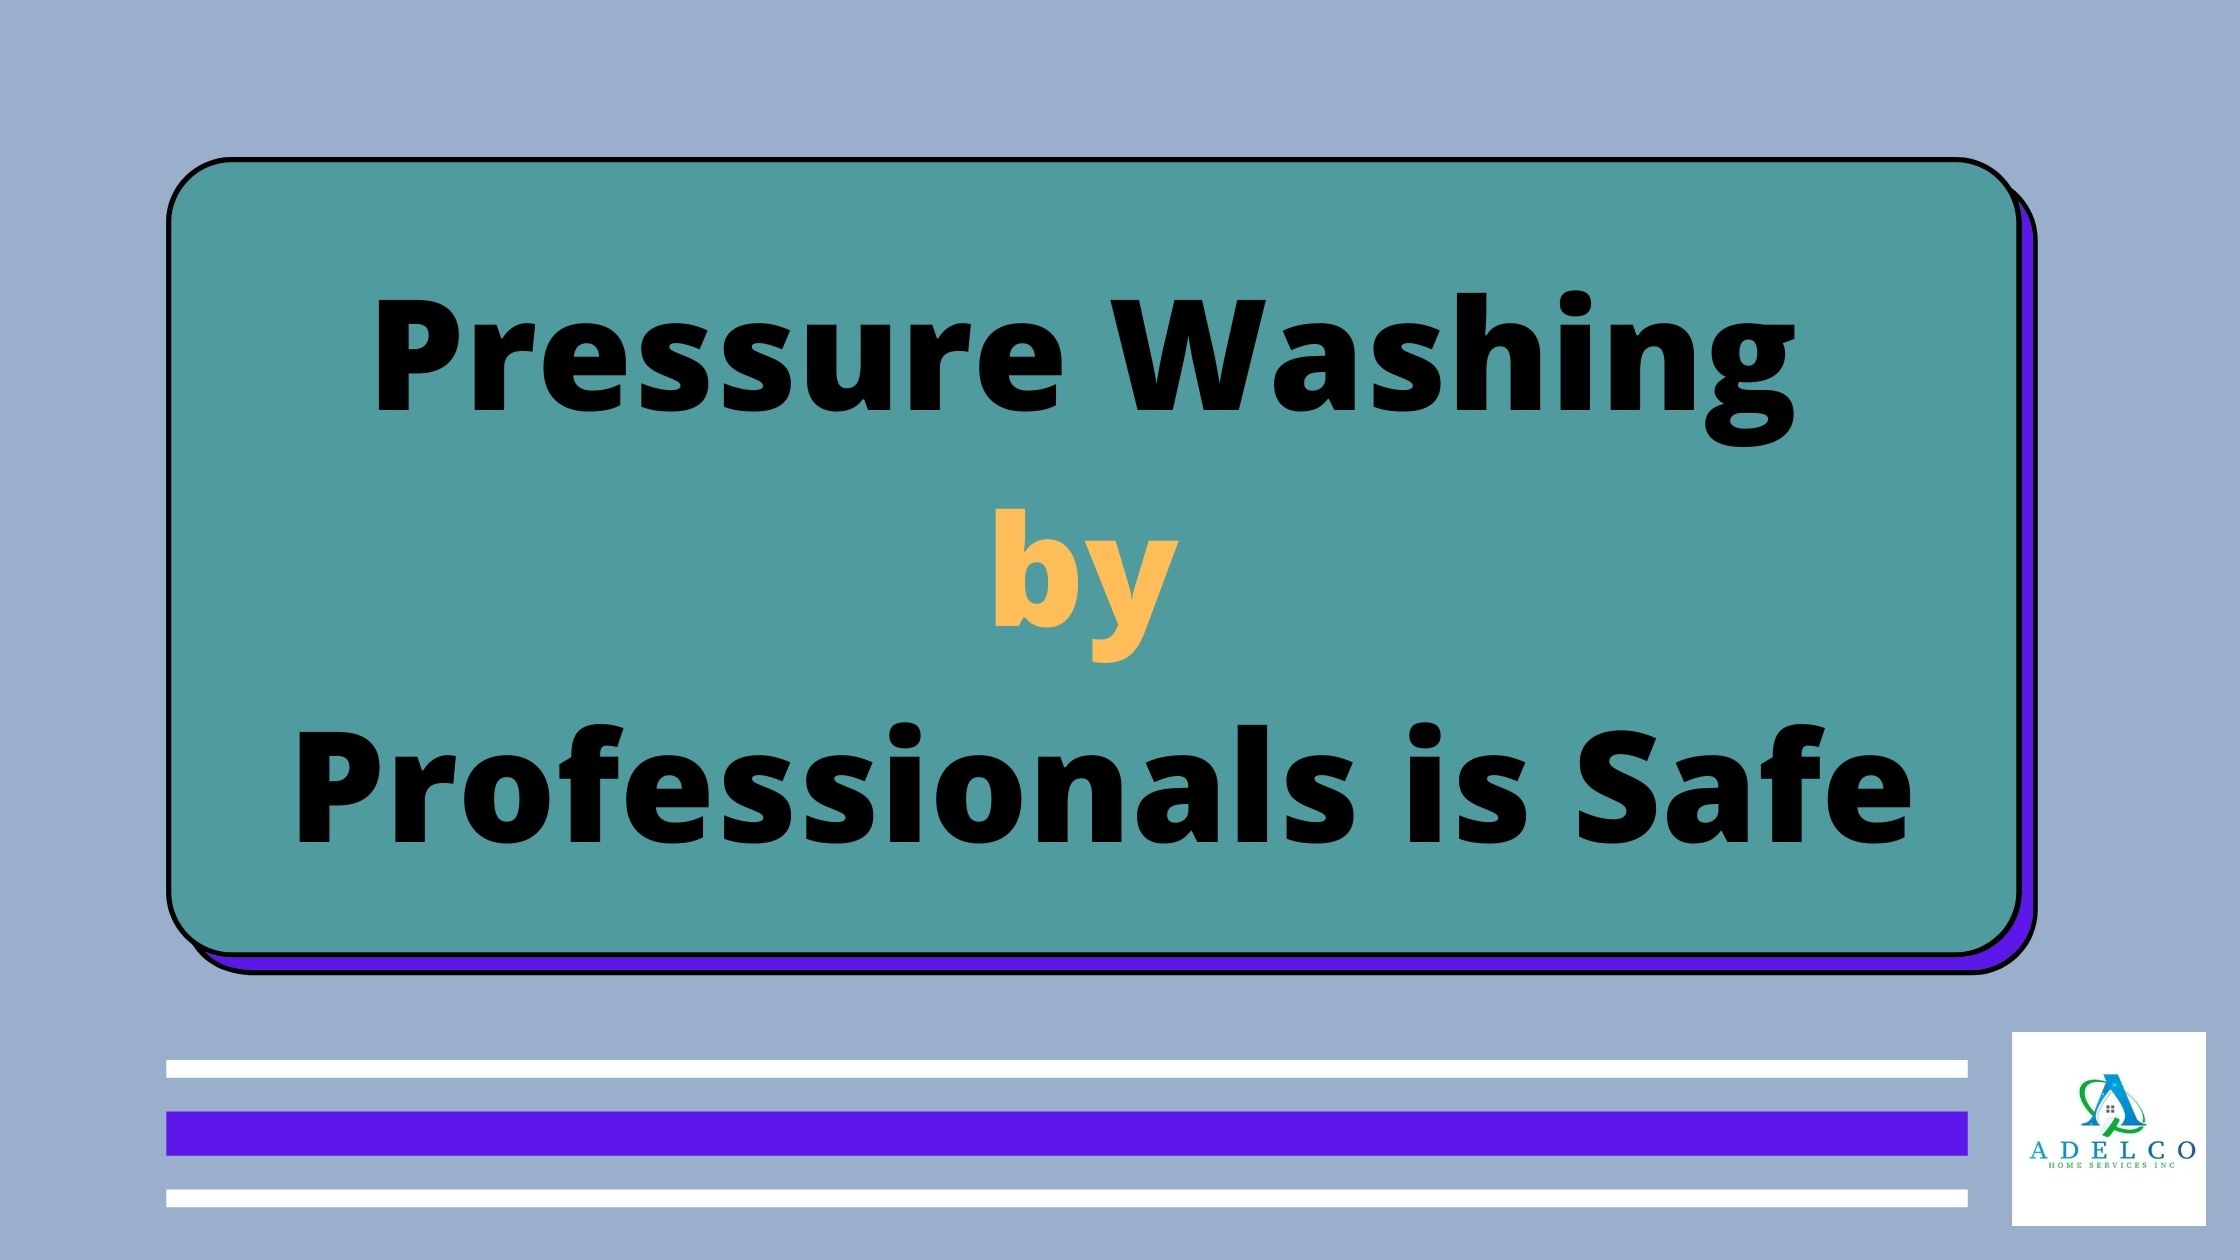 Pressure Washing by Professionals is Safe